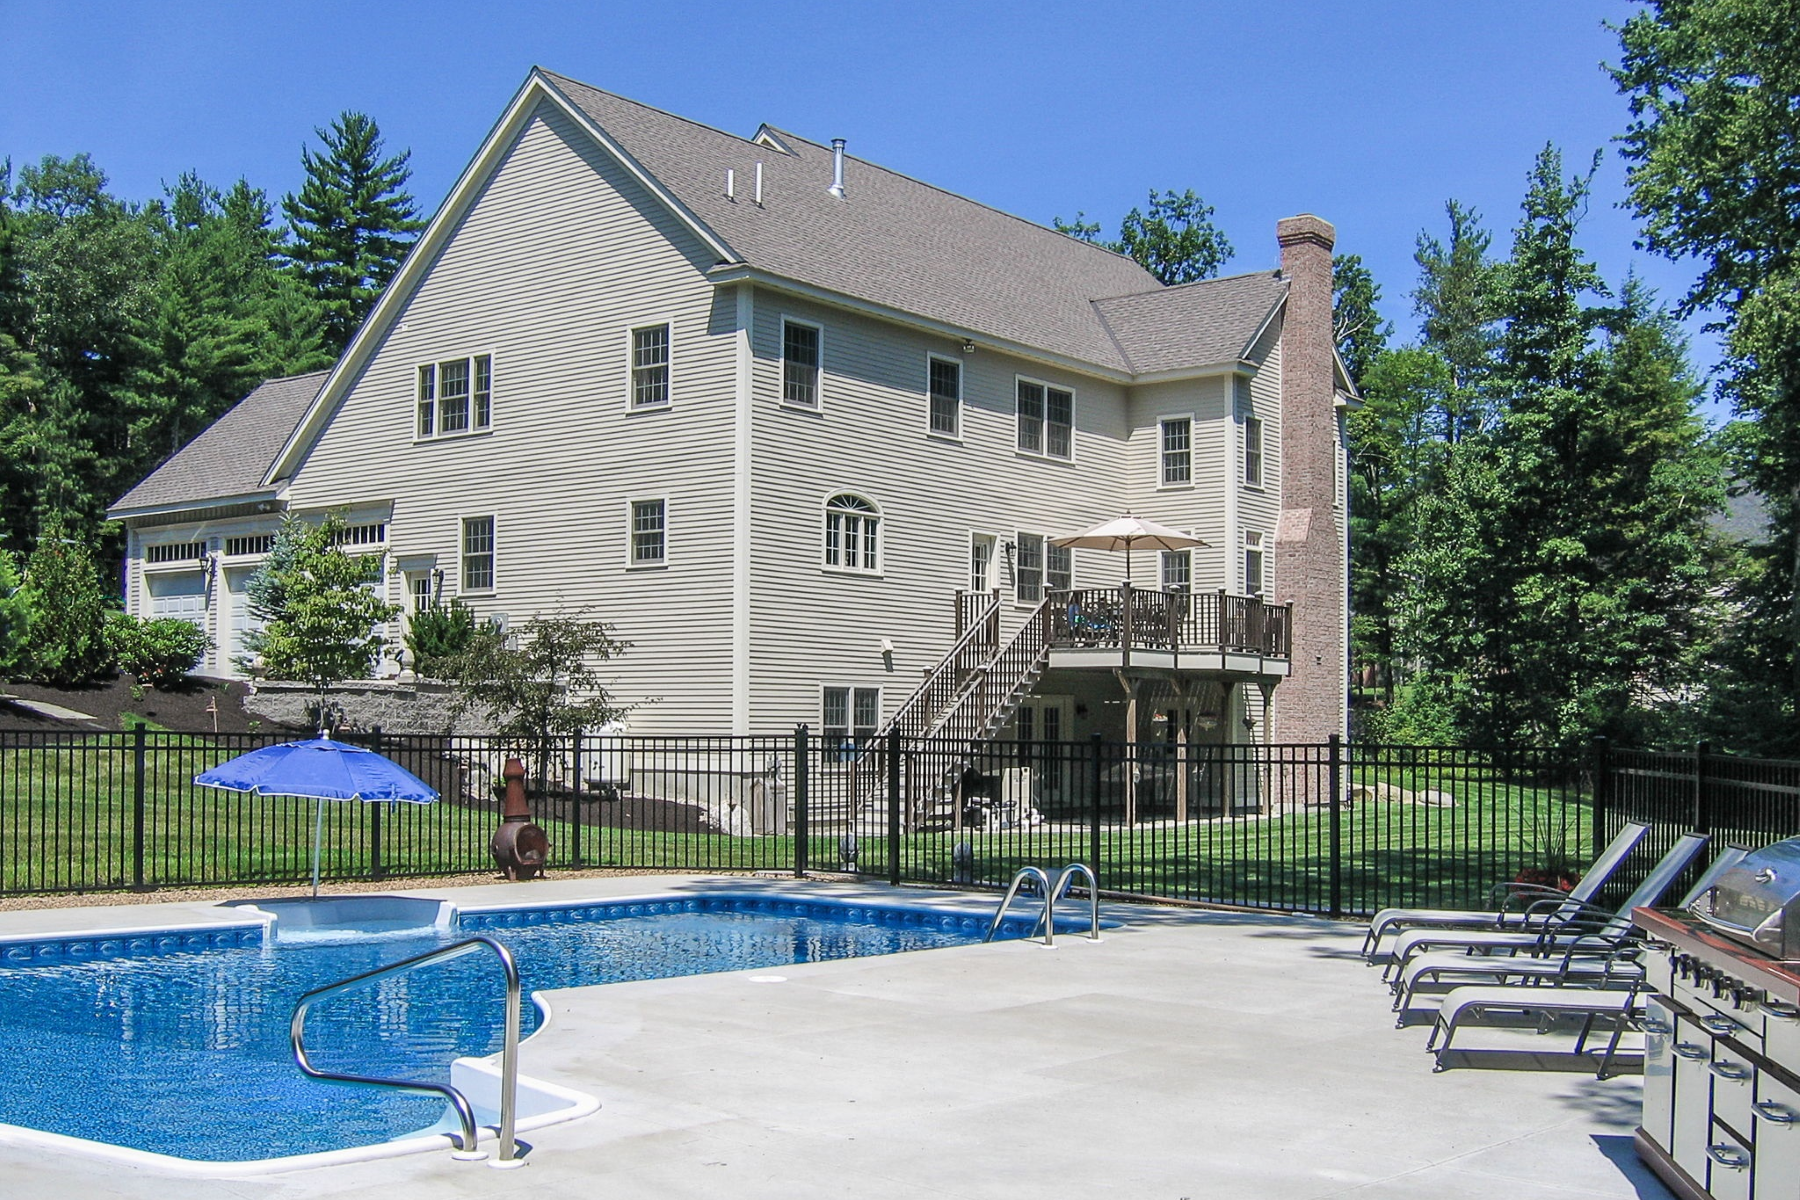 Property for Sale at Stately Boutin-Built Colonial 78 Rolling Woods Drive, Bedford, NH 03110